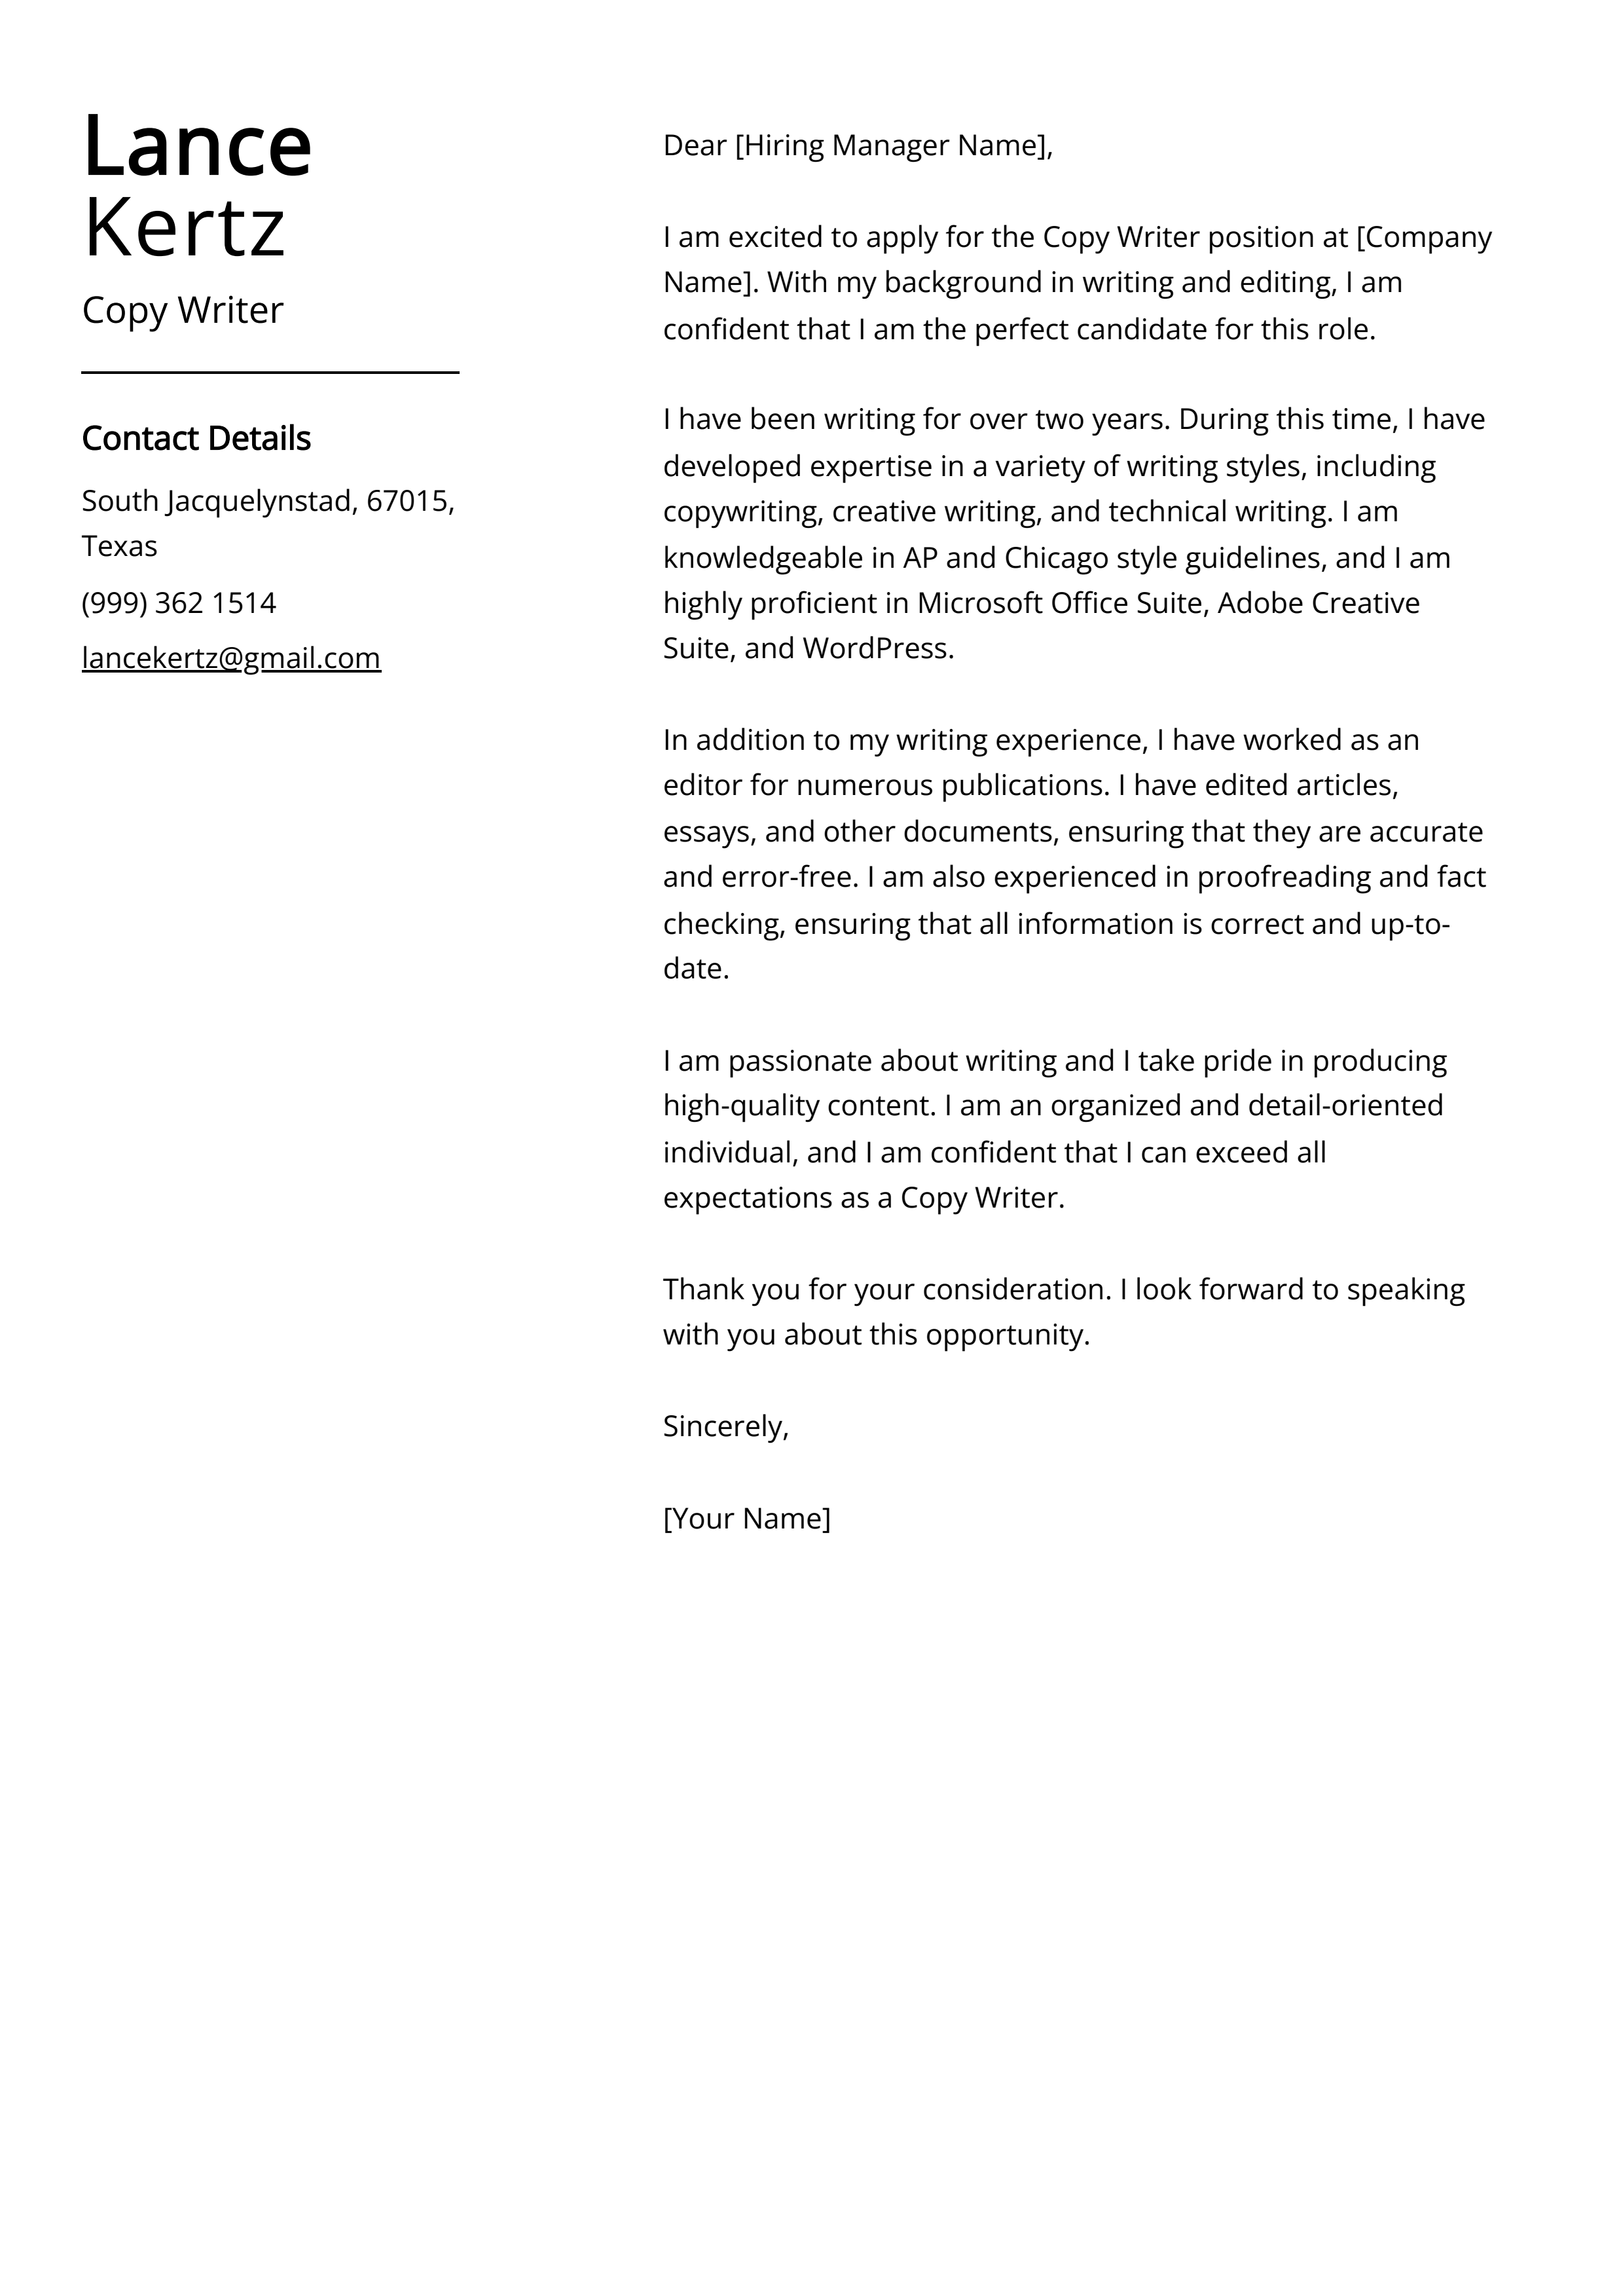 Copy Writer Cover Letter Example